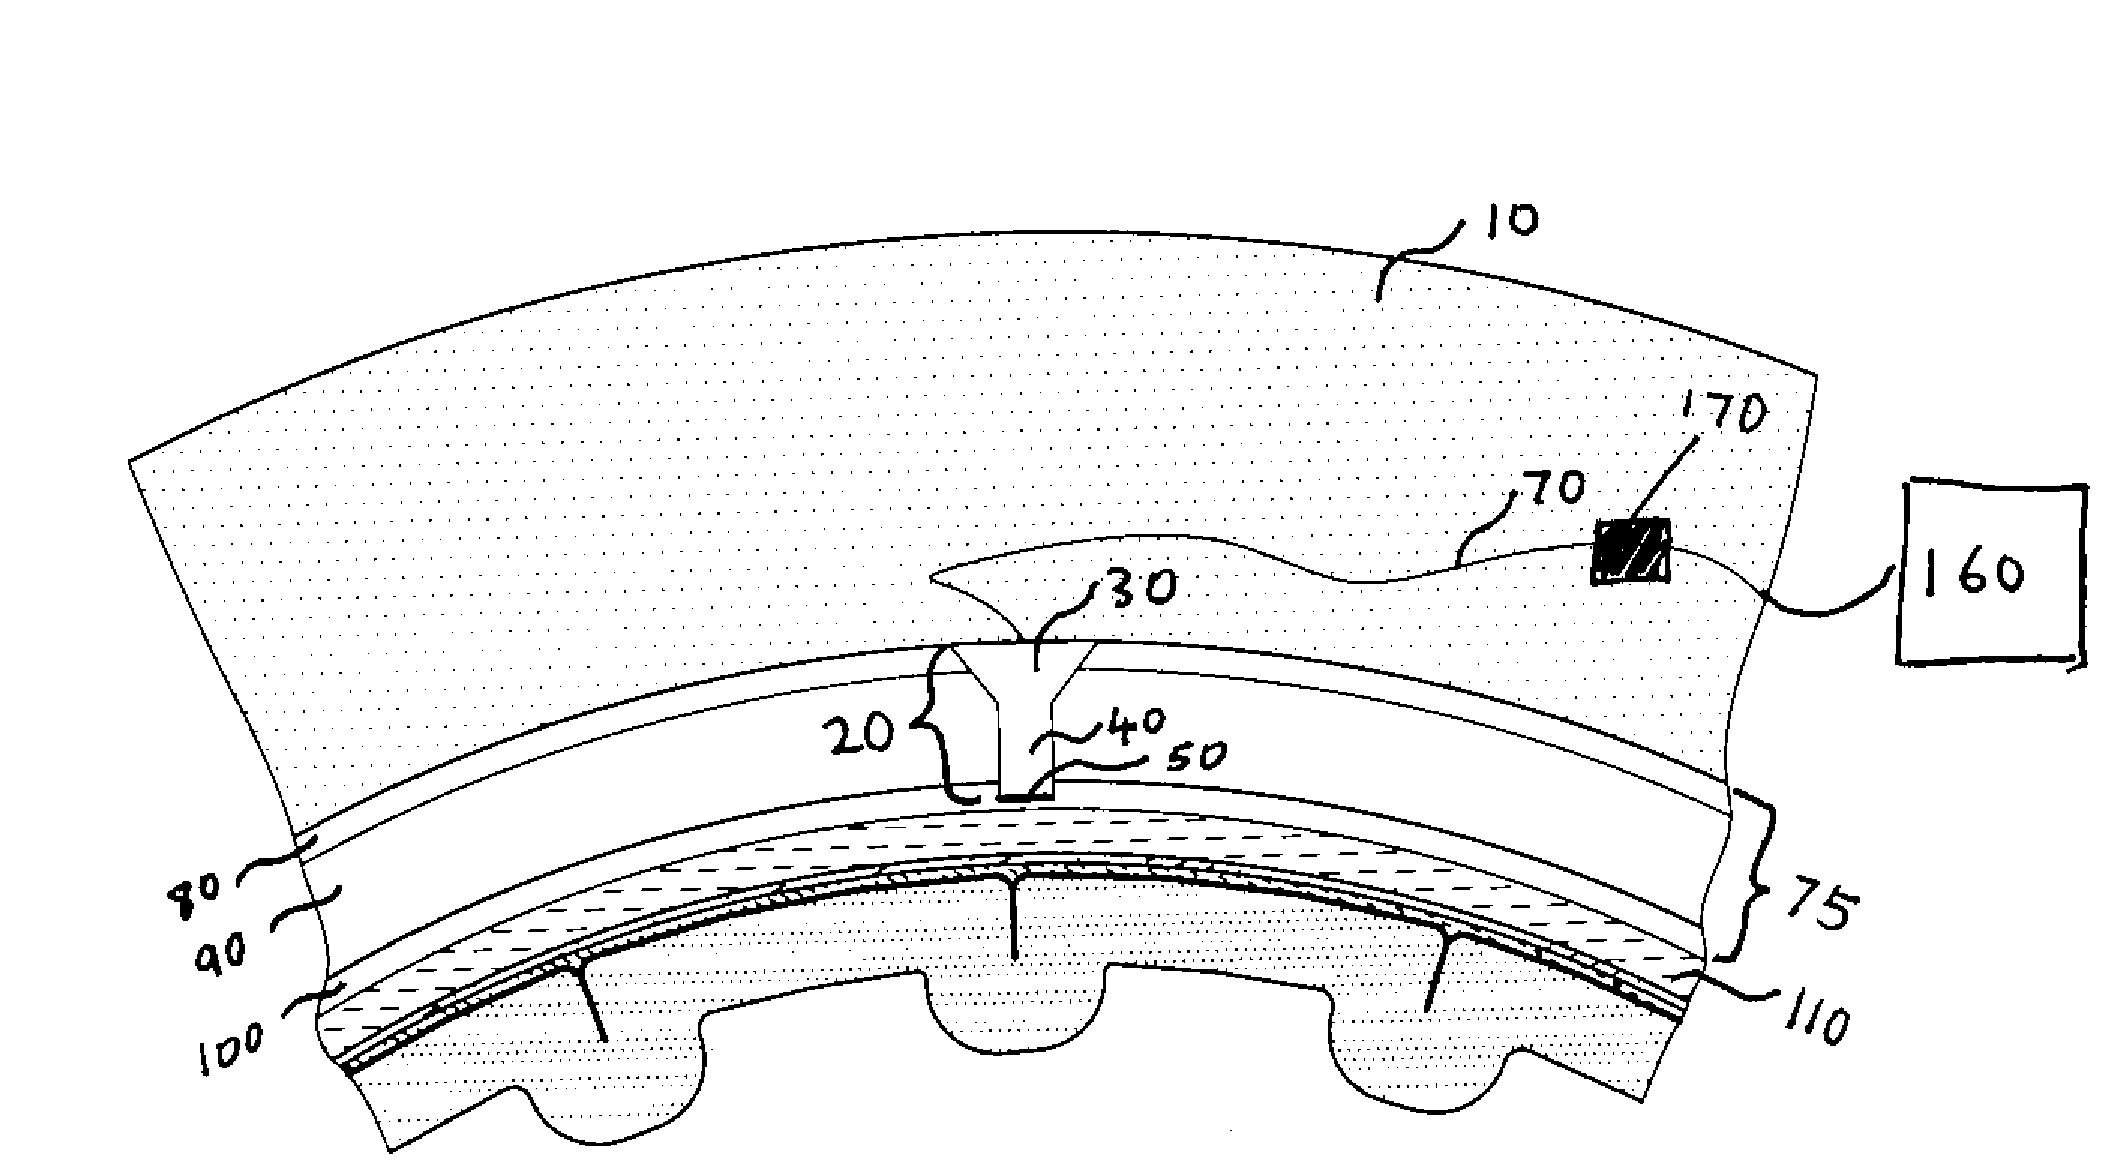 Methods and Systems for Using Intracranial Electrodes